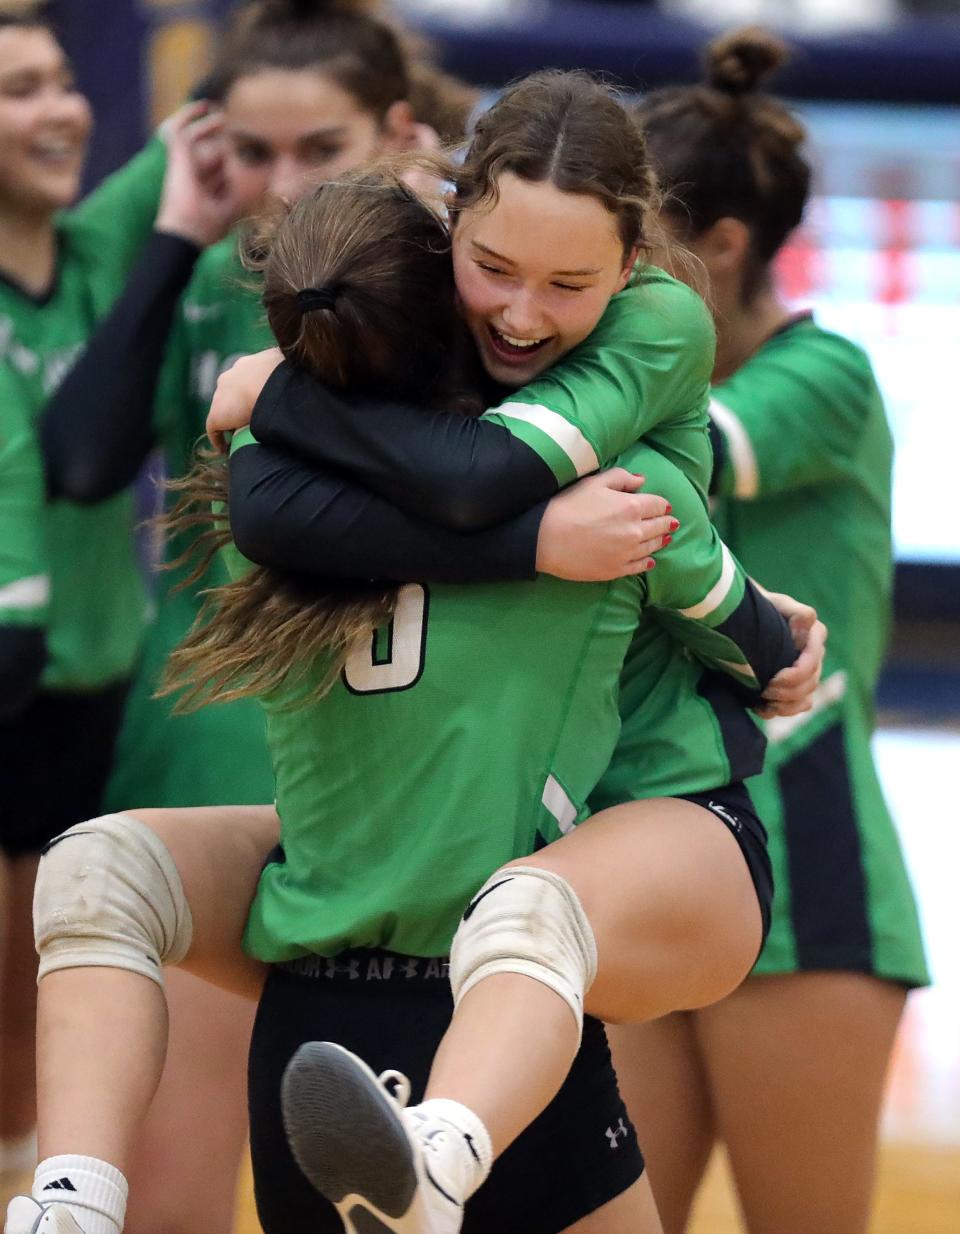 Highland's Kate Weber, facing, celebrates with Izzy Shank after beat Amherst in a Division I regional volleyball semifinal, Thursday, Nov. 3, 2022, in Norwalk, Ohio.